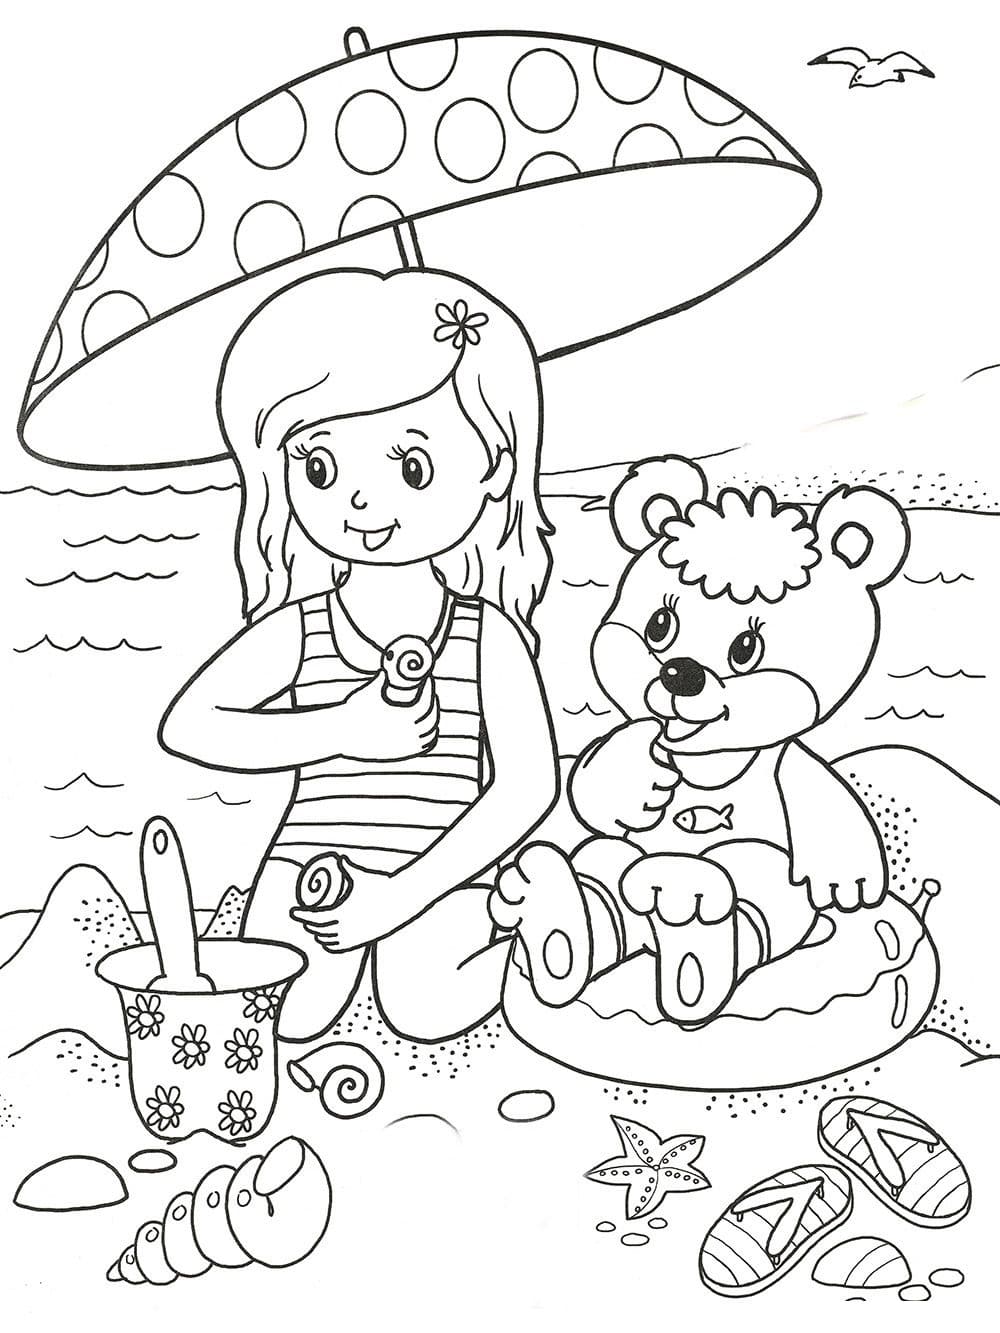 printable-coloring-pages-summer